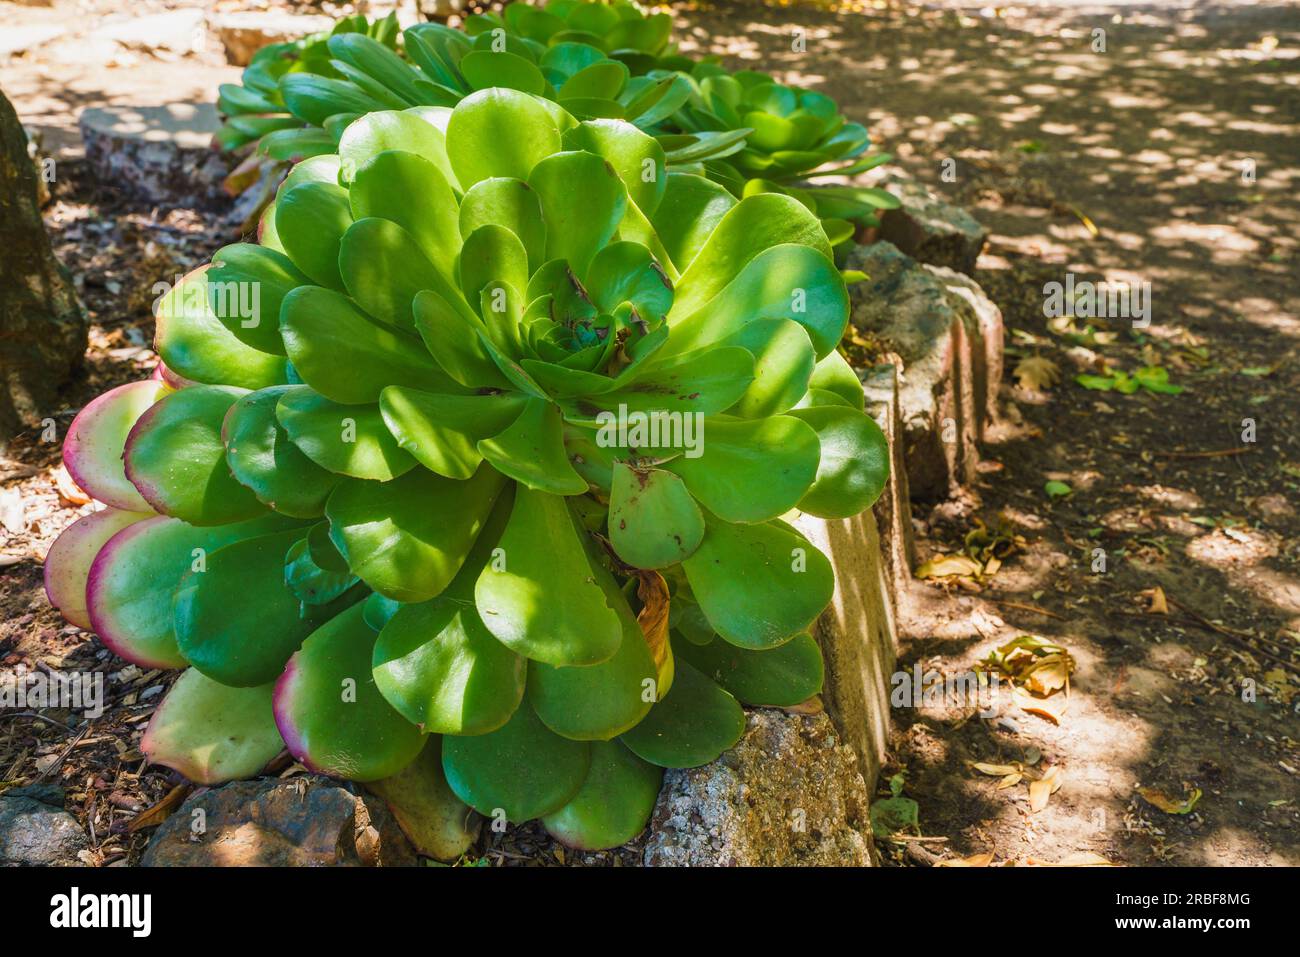 Aeonium Arboreum (Tree Aeonium) close-up in the garden. Beautiful evergreen succulent plant with thick woody stems and large rosettes Stock Photo